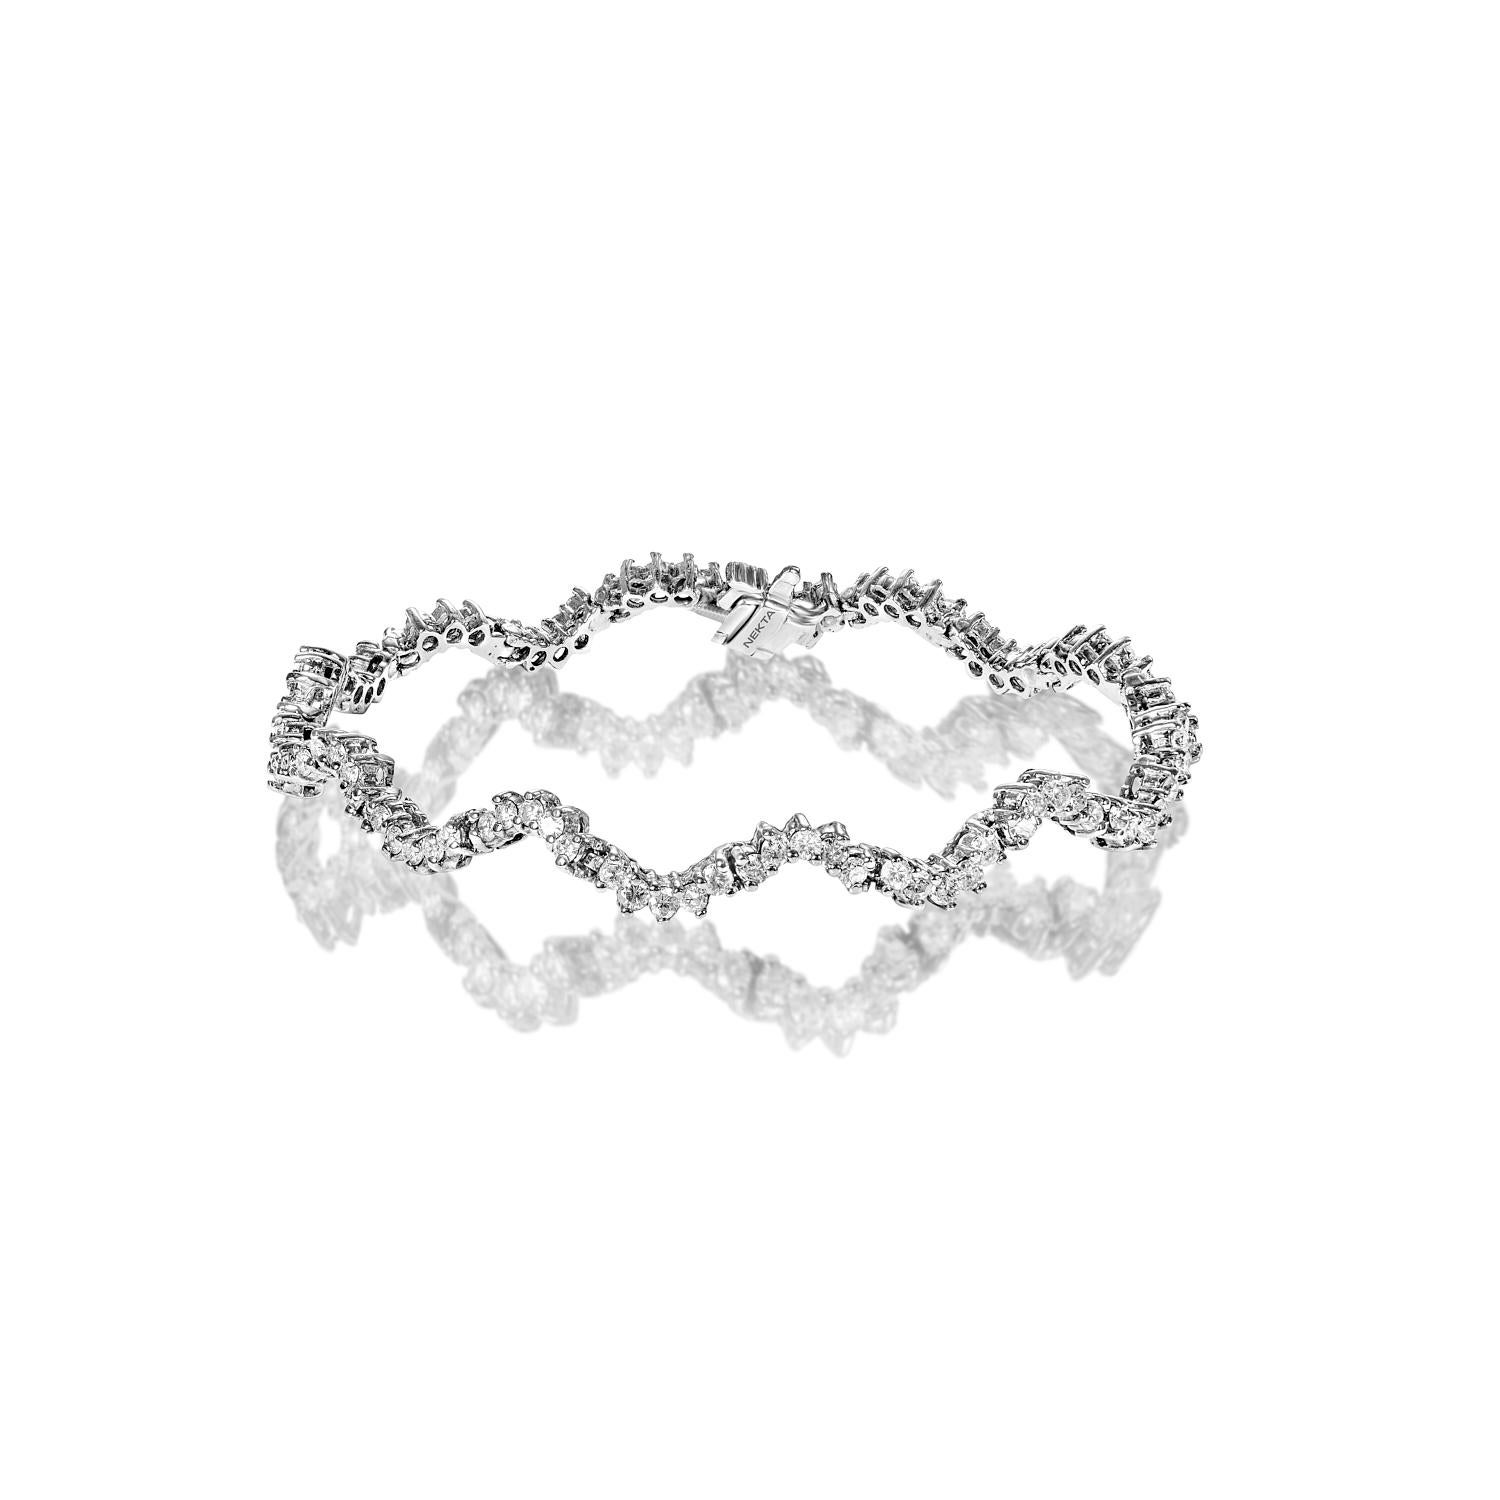 The OAKLYN 3.34 Carat Single Row Diamond Tennis Bracelet features ROUND BRILLIANT CUT DIAMONDS brilliants weighing a total of approximately 3.34 carats, set in 14K White Gold.

Style: Single Row Diamond Tennis Bracelet


Diamonds
Diamond Size: 3.34